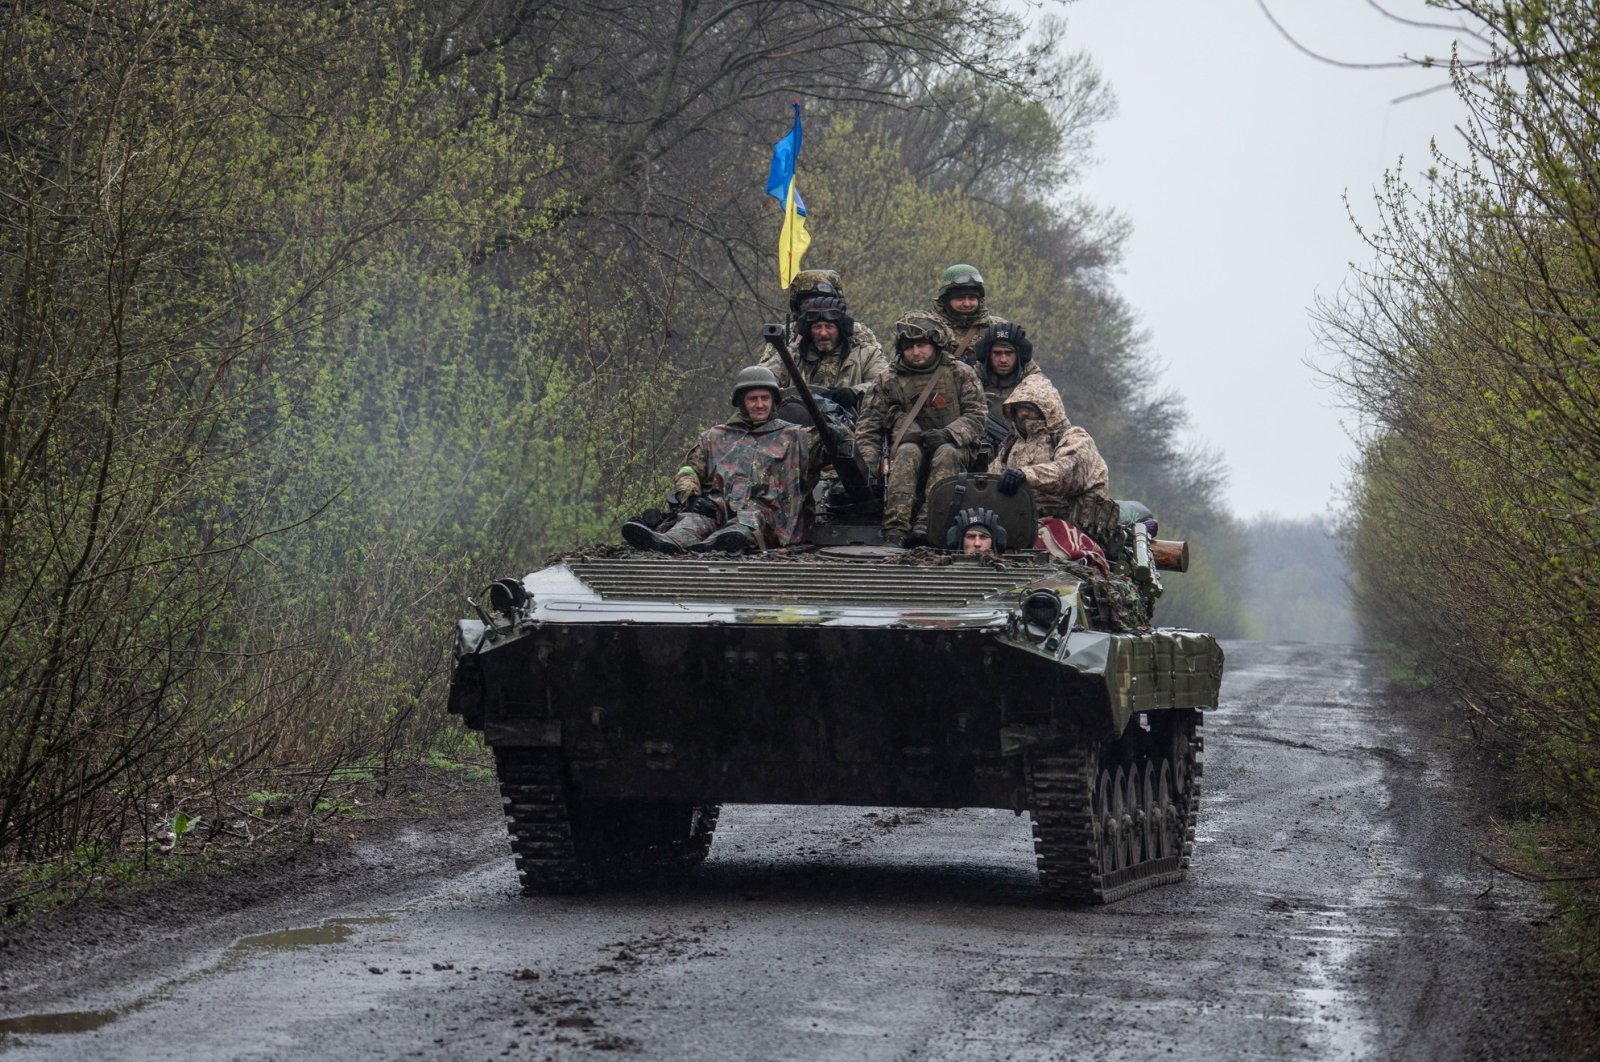 Ukrainian servicemen ride atop an armored fighting vehicle, as Russia&#039;s attack on Ukraine continues, at an unknown location in eastern Ukraine, in this handout picture released April 19, 2022.  (Press service of the Ukrainian Ground Forces/Handout via Reuters)